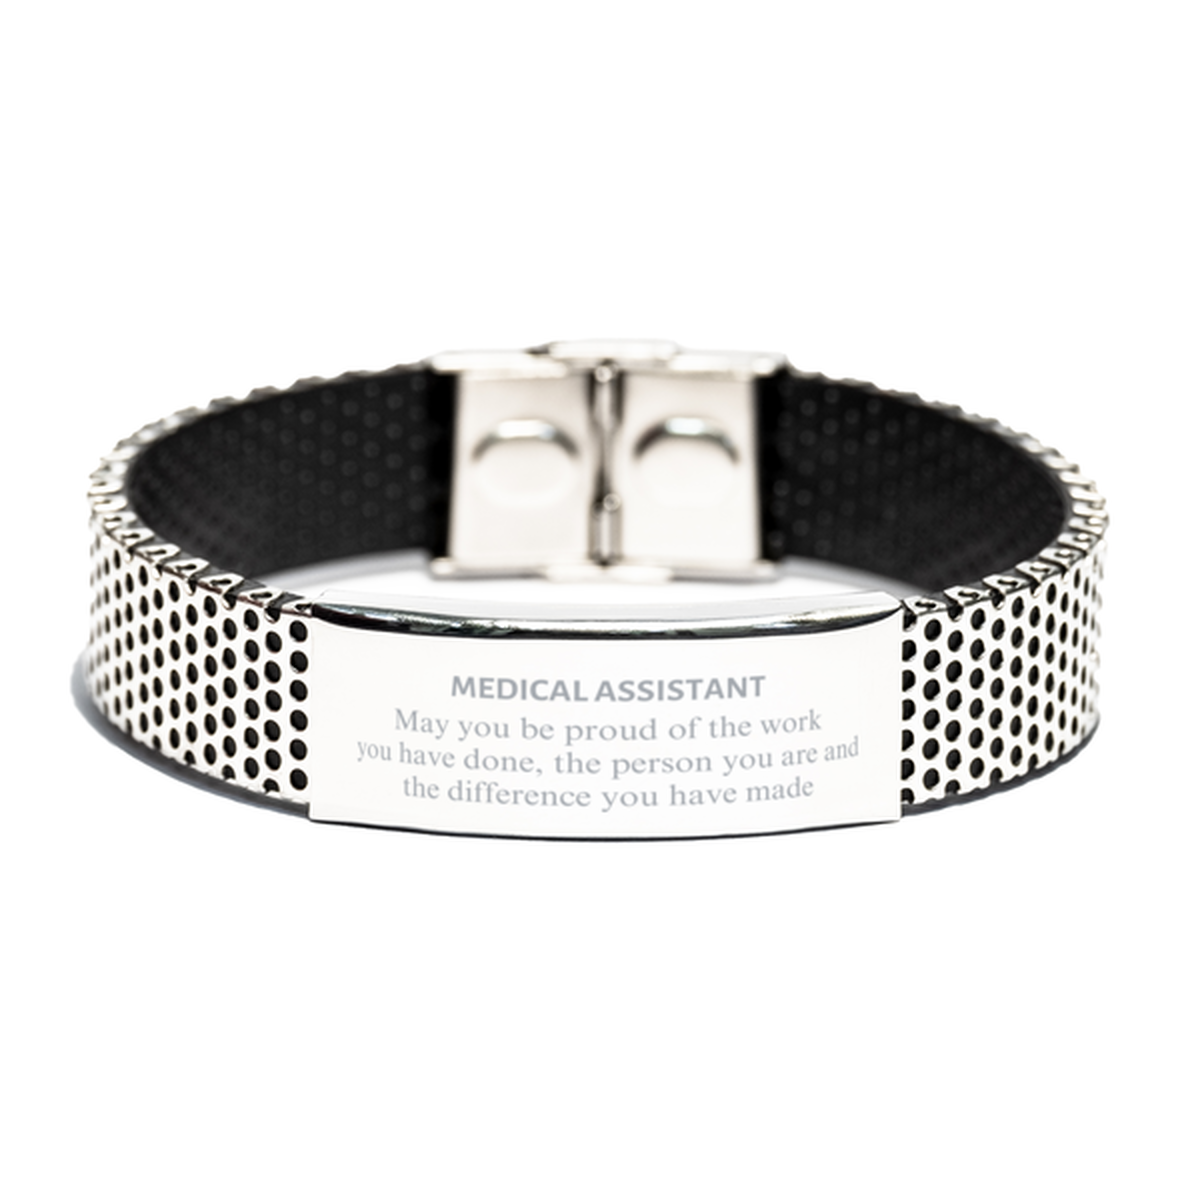 Medical Assistant May you be proud of the work you have done, Retirement Medical Assistant Stainless Steel Bracelet for Colleague Appreciation Gifts Amazing for Medical Assistant